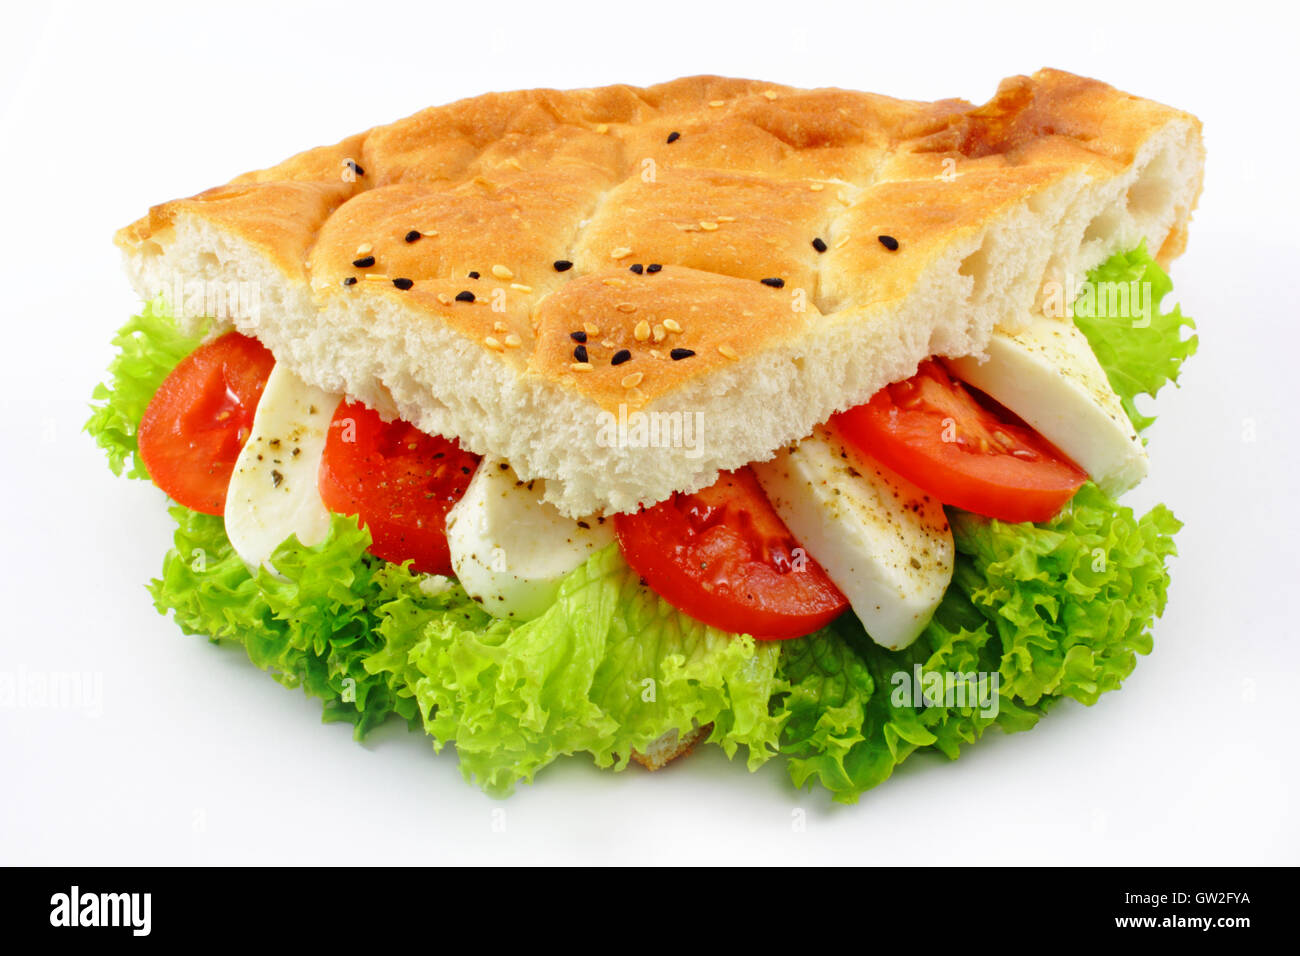 fresh pide bread with tomatoes, mozzarella cheese and salad Stock Photo